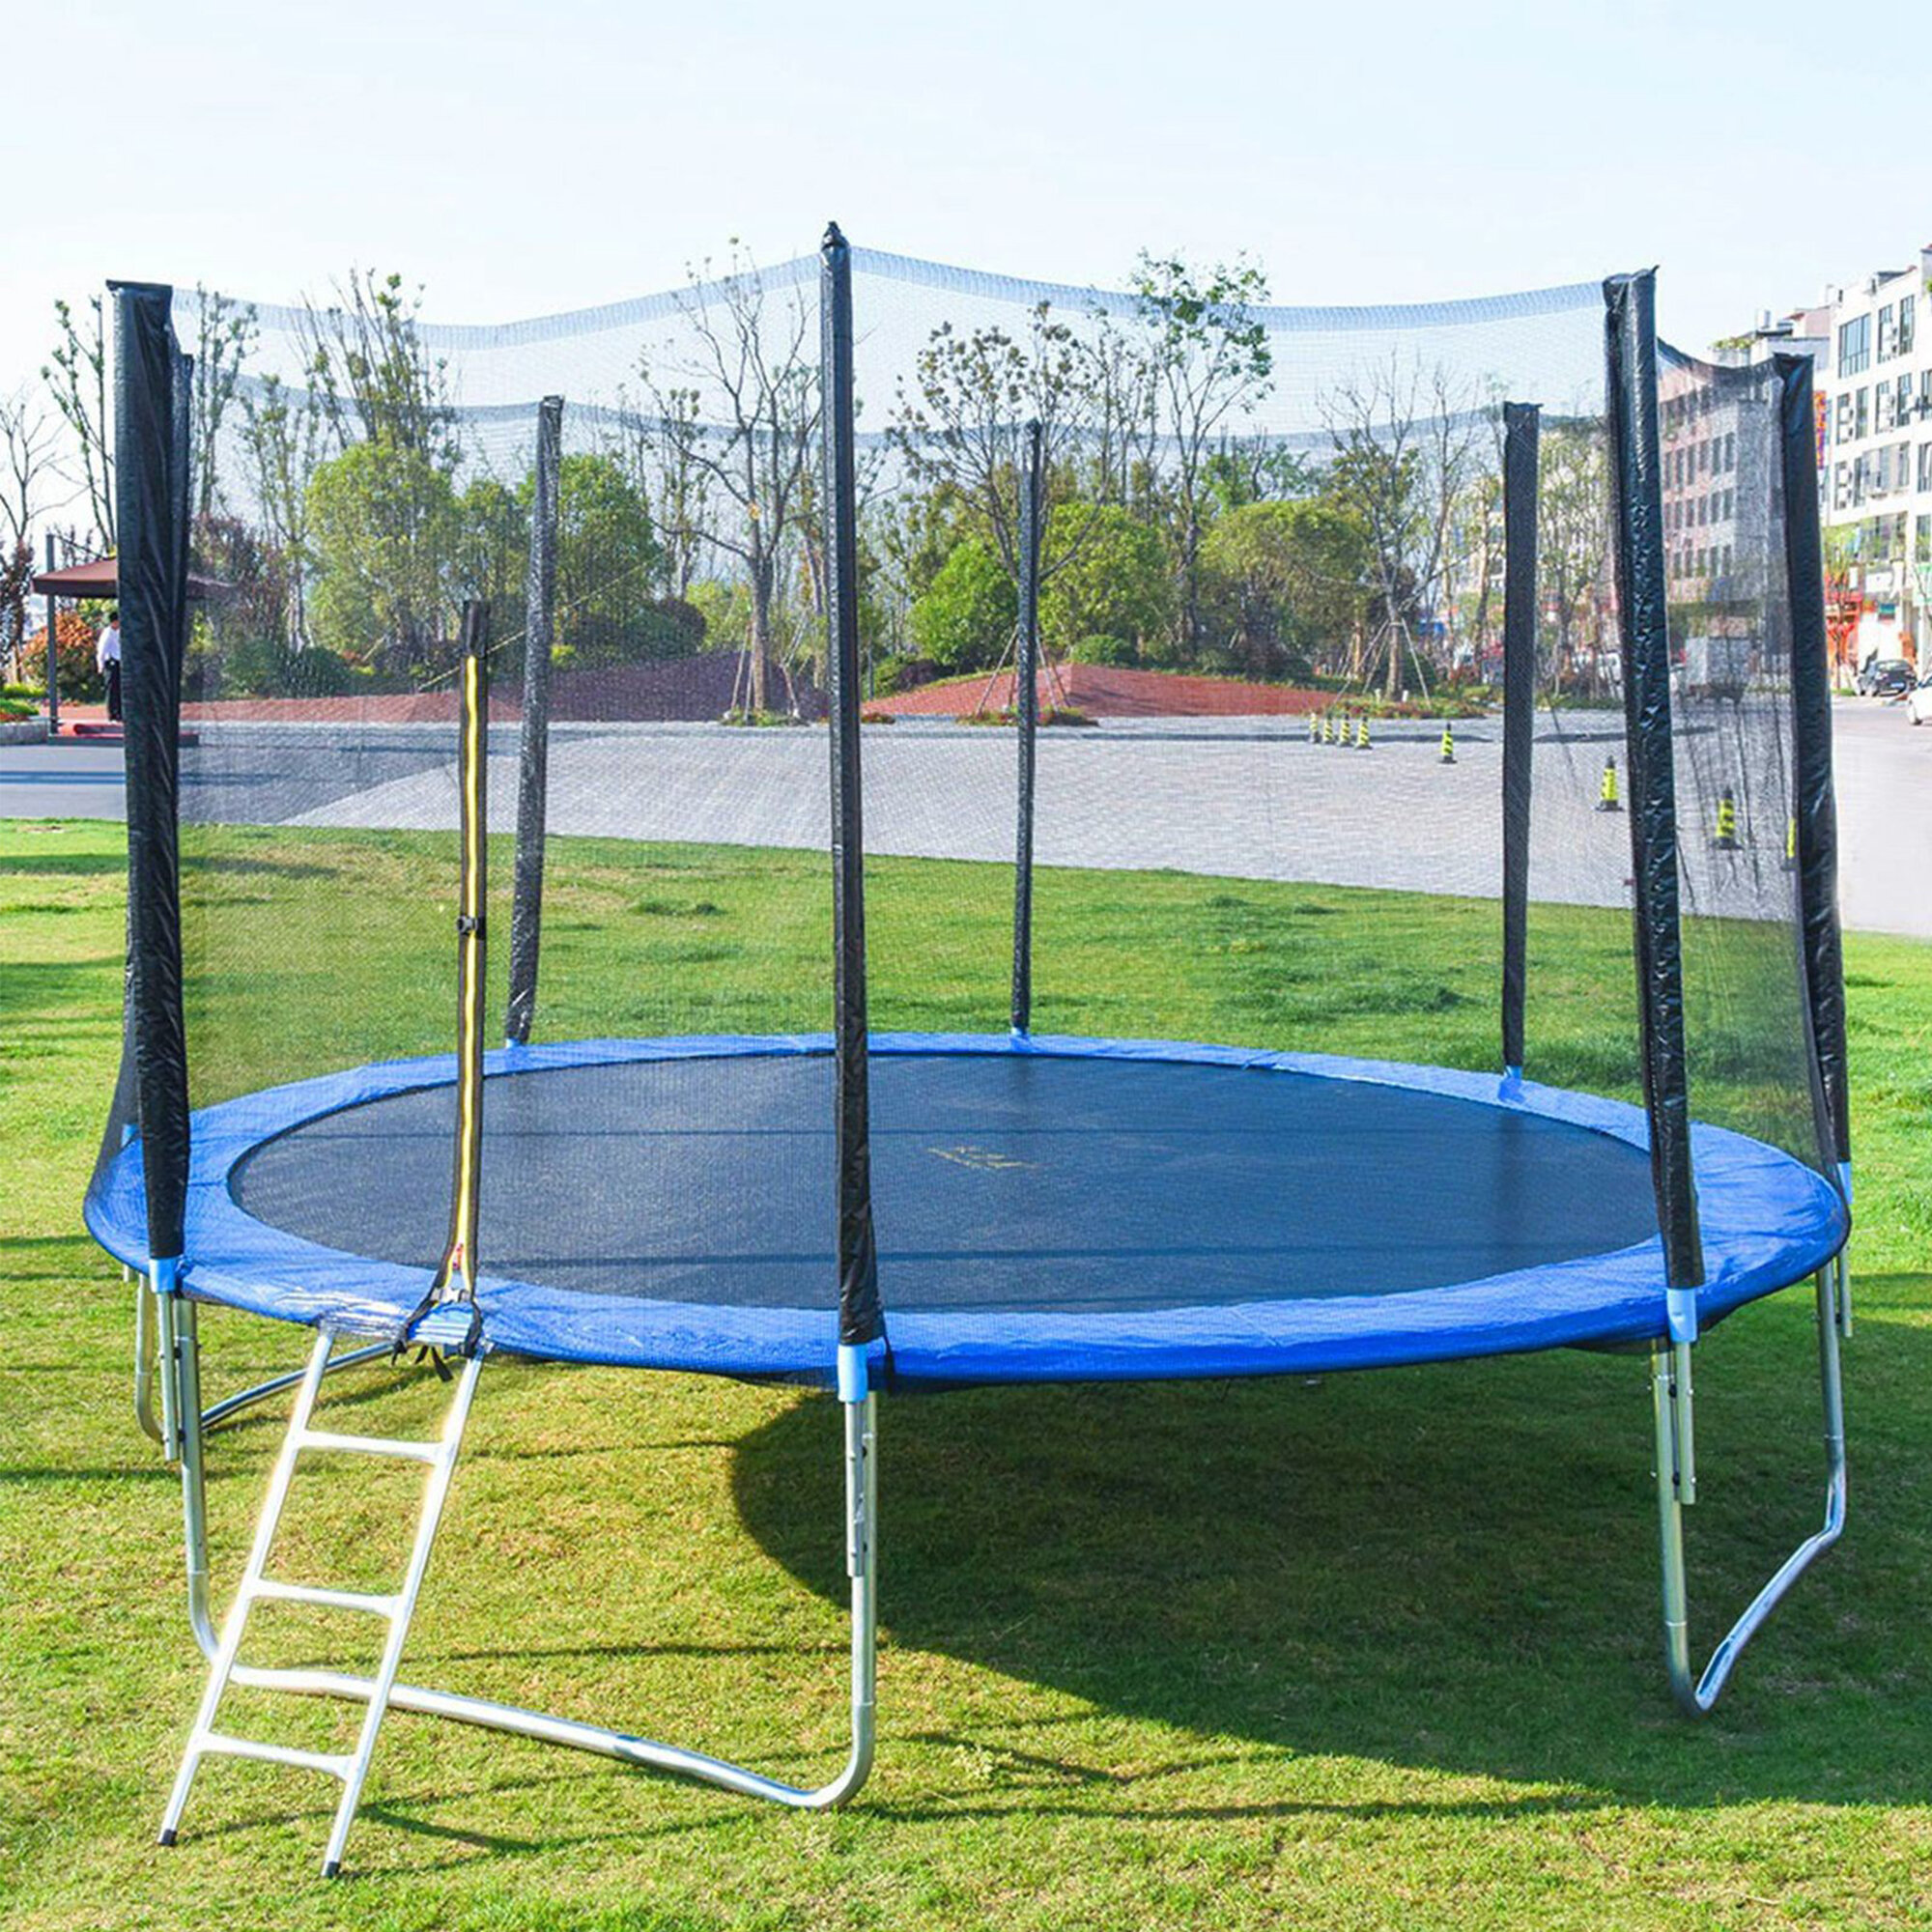 12 FT Kids Trampoline With Enclosure Net Jumping Mat And Spring Cover Padding US 